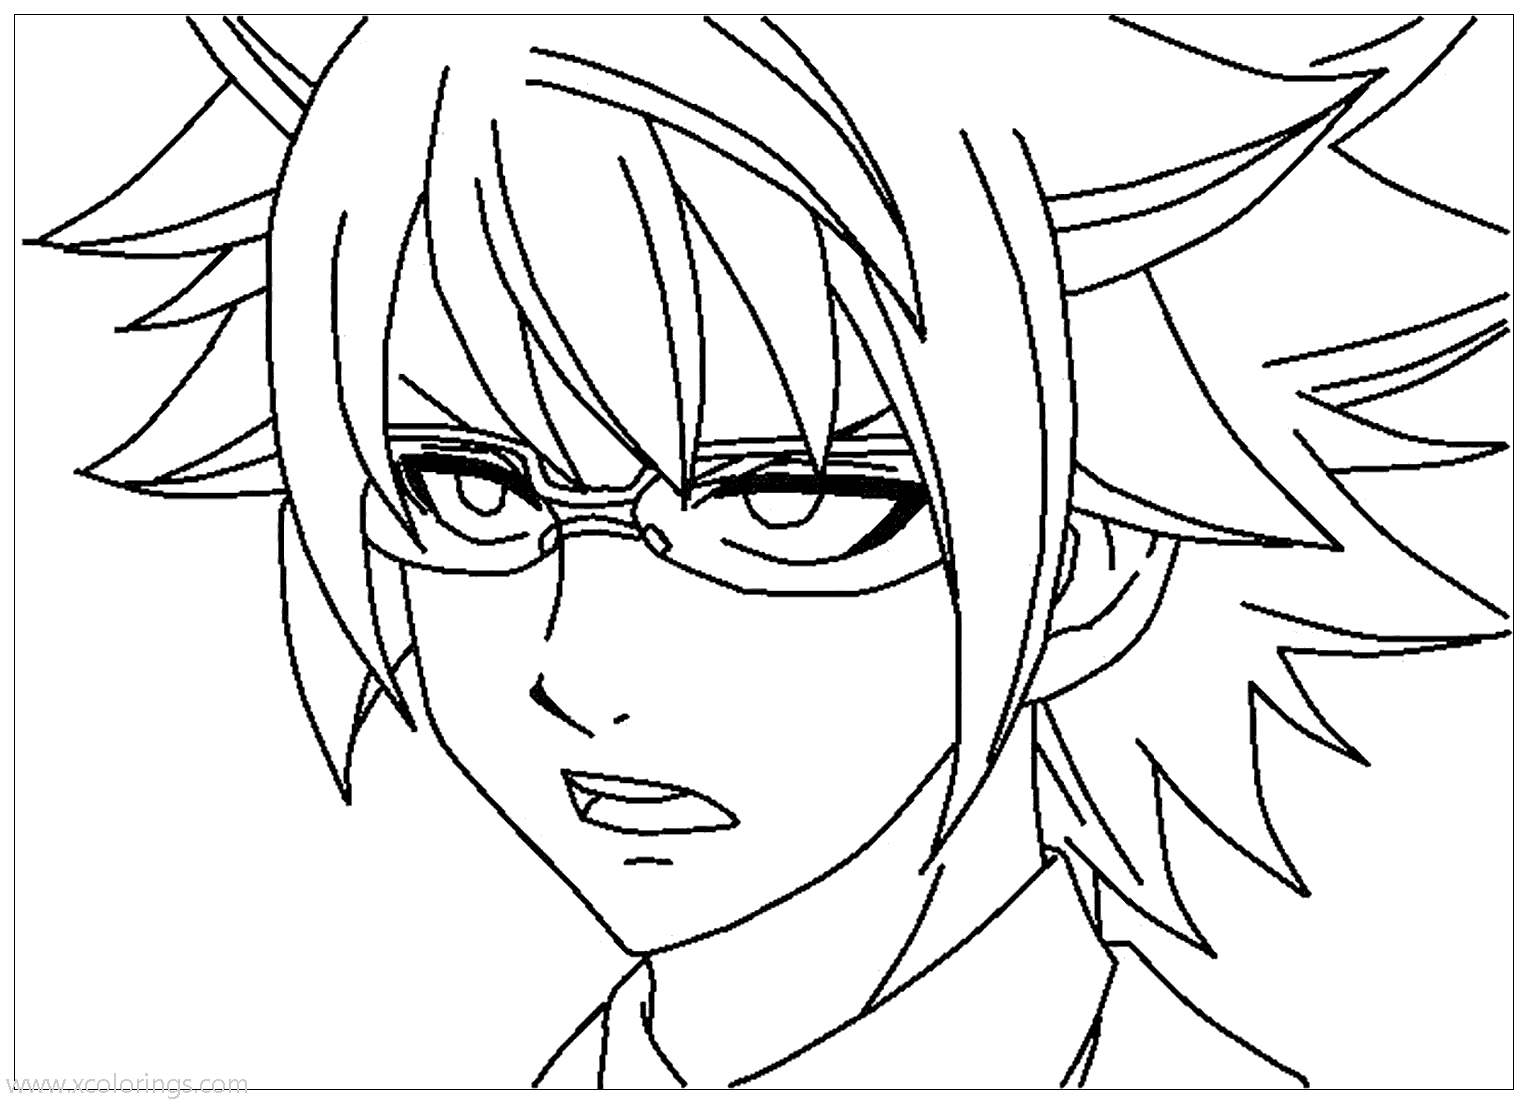 Free Fairy Tail Coloring Pages Loke printable